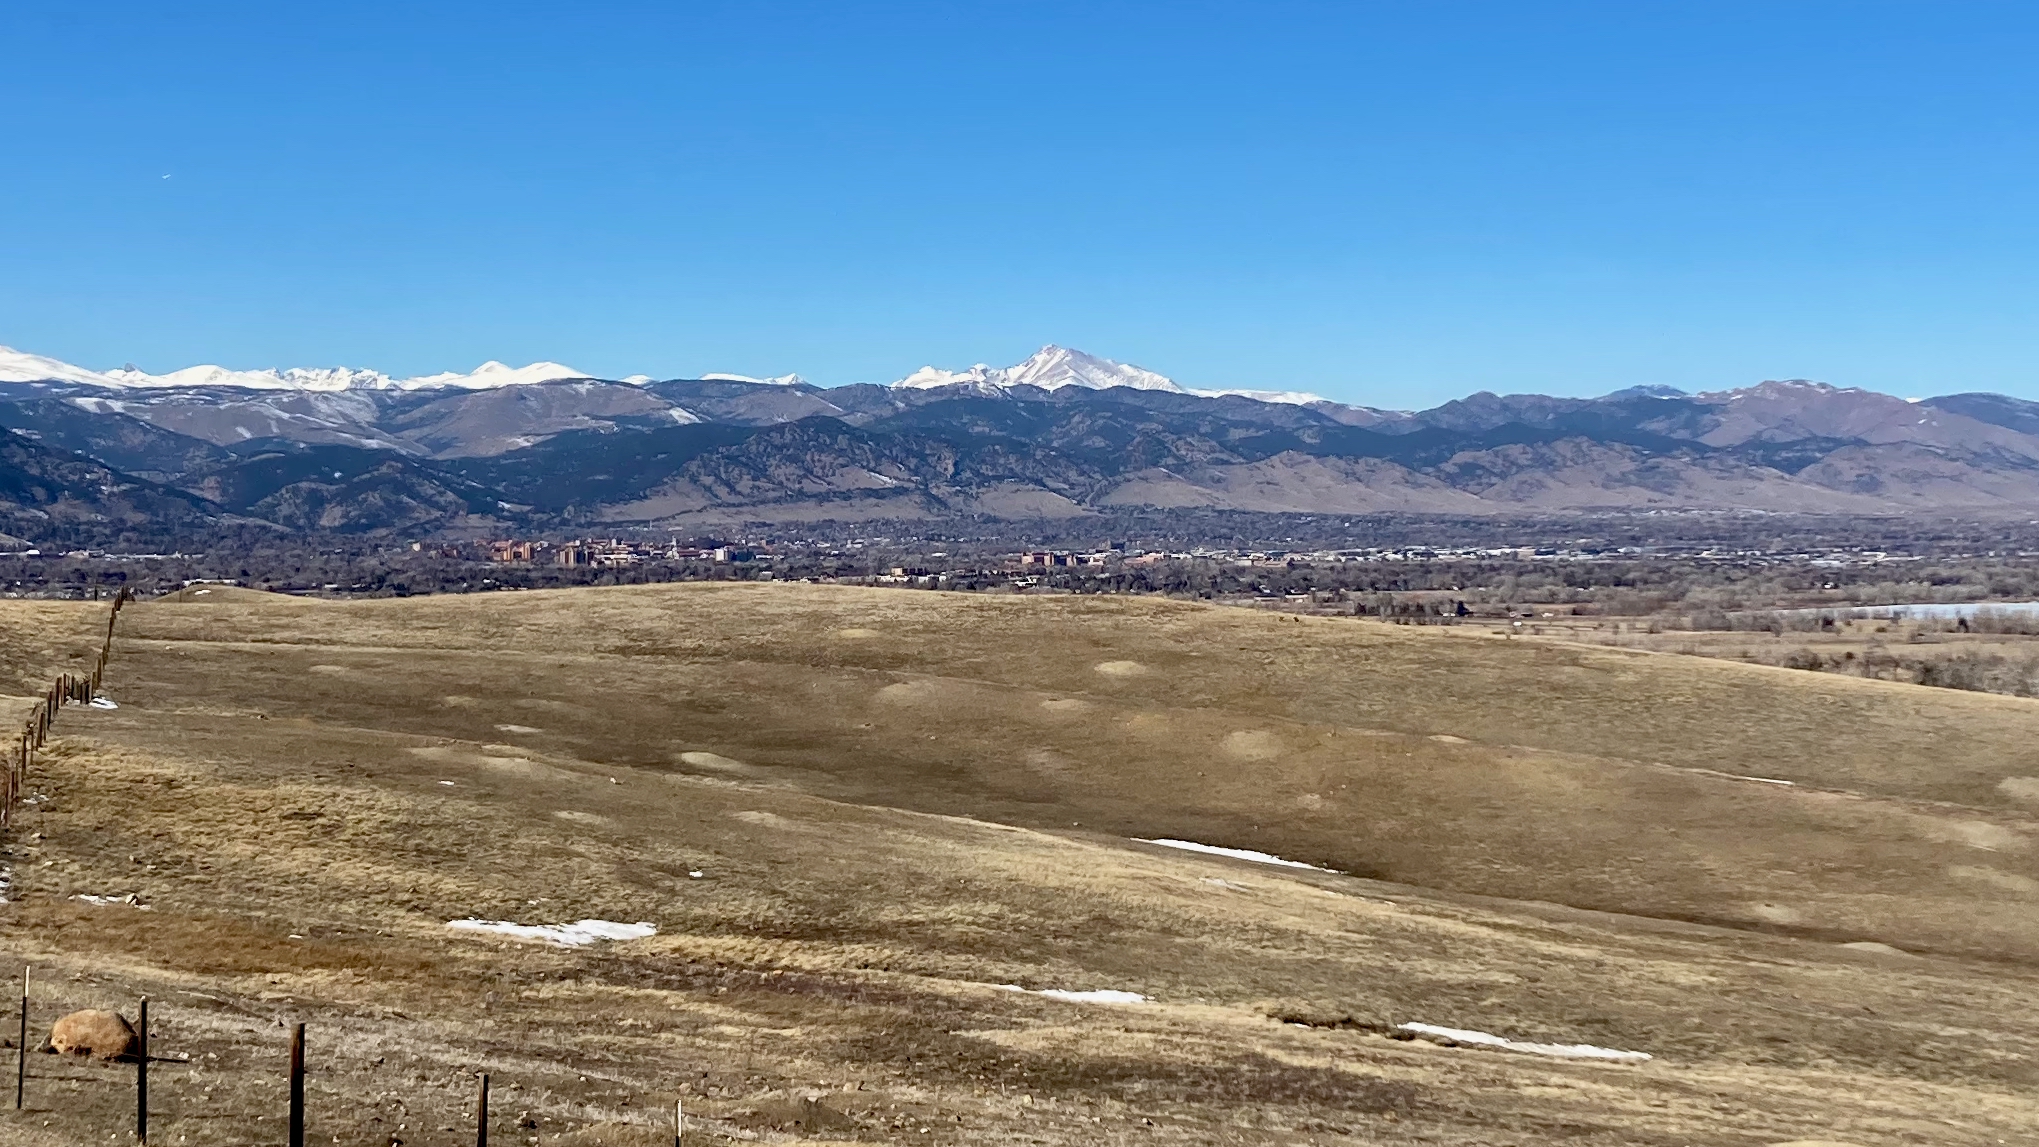 Longs Peak rising up from the plains is always an inspiring sight!